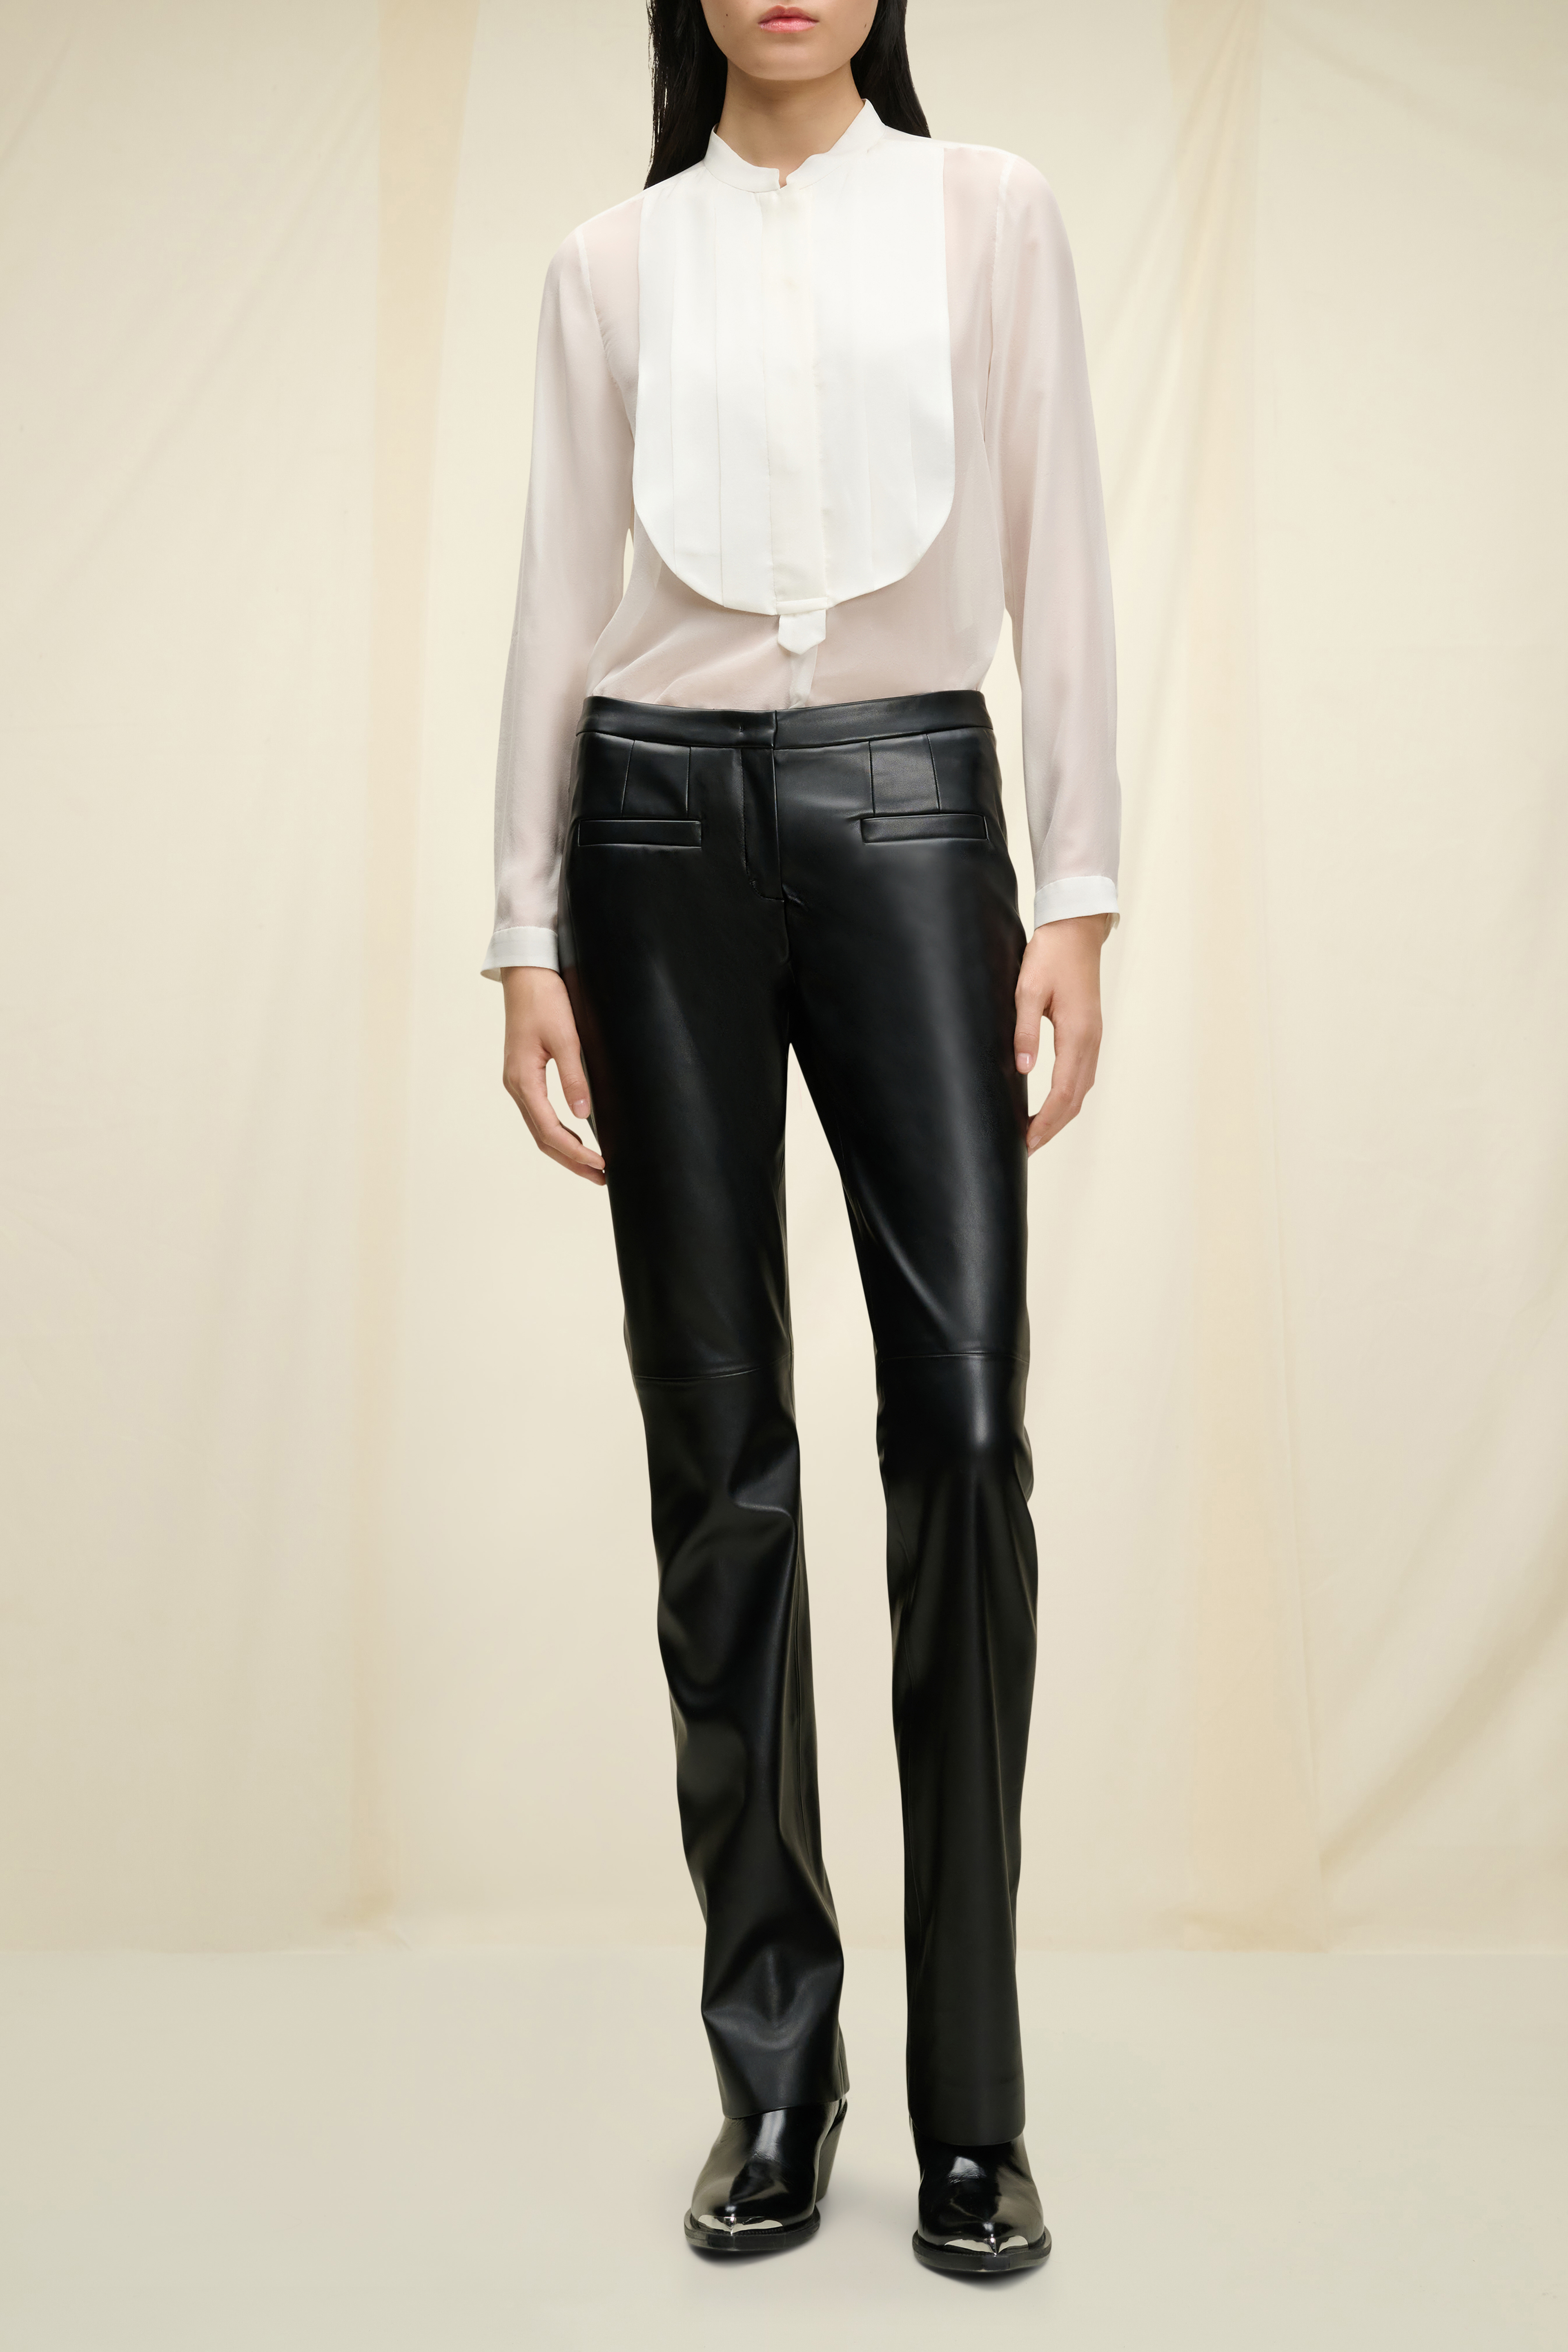 Dorothee Schumacher Blouse with